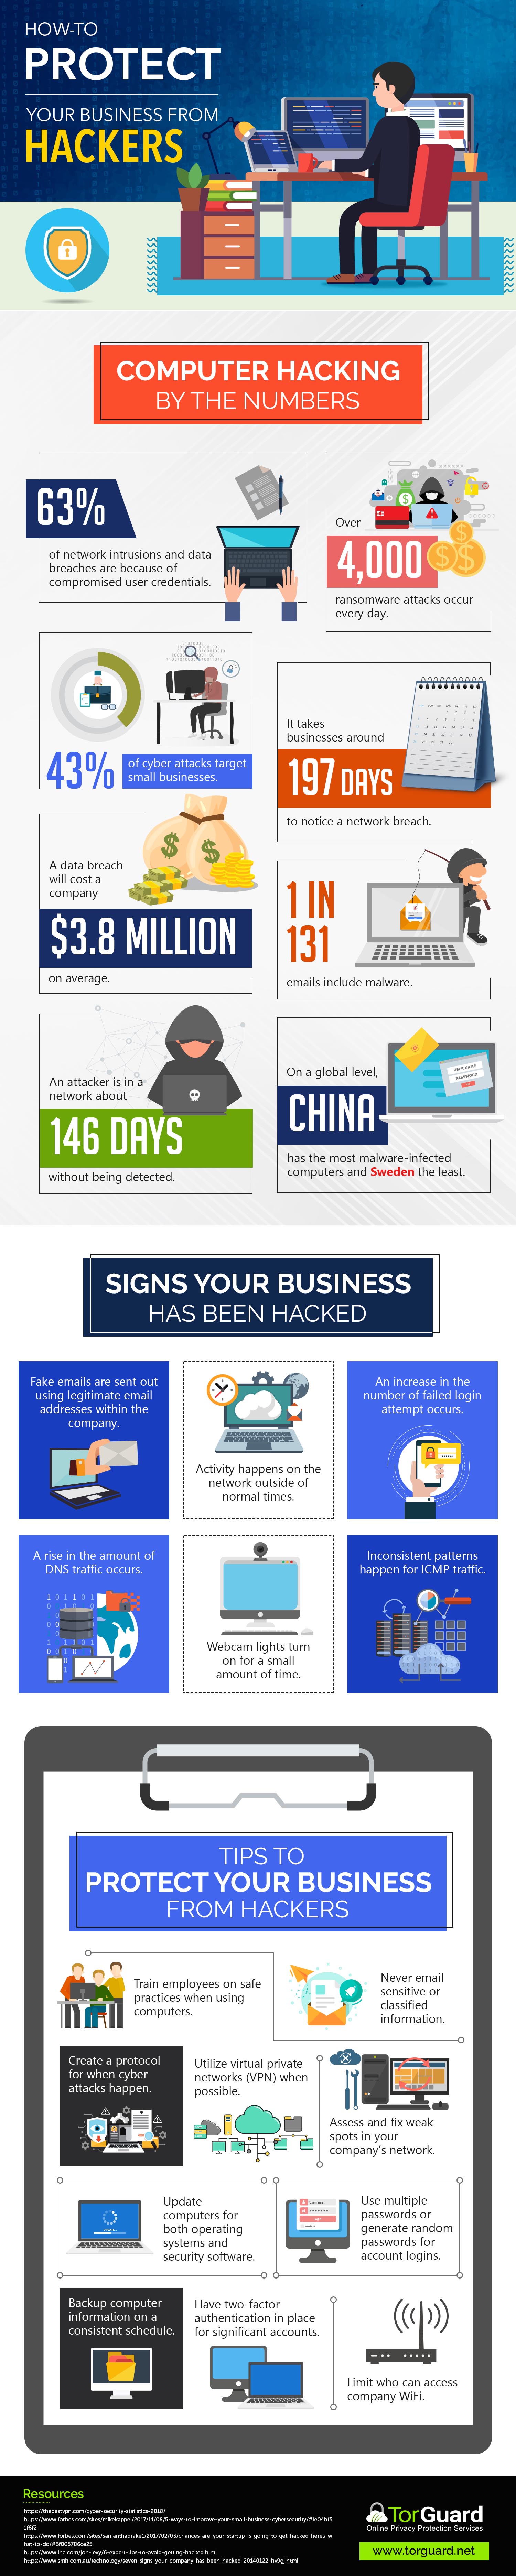 How to Protect Your Business From Hackers